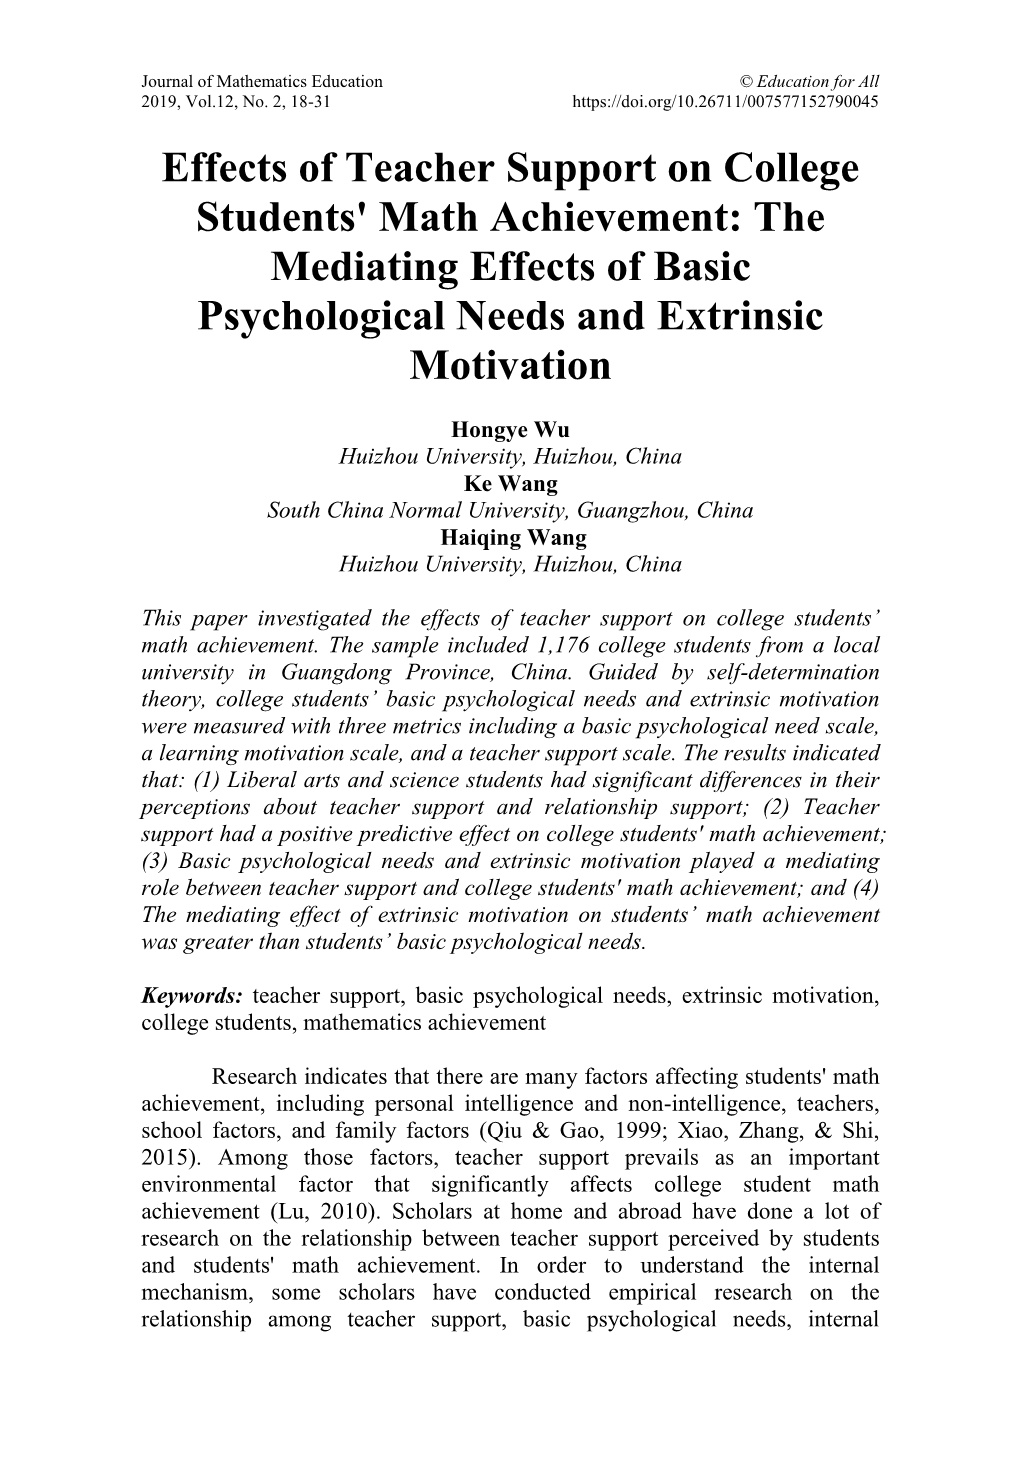 Effects of Teacher Support on College Students' Math Achievement: the Mediating Effects of Basic Psychological Needs and Extrinsic Motivation